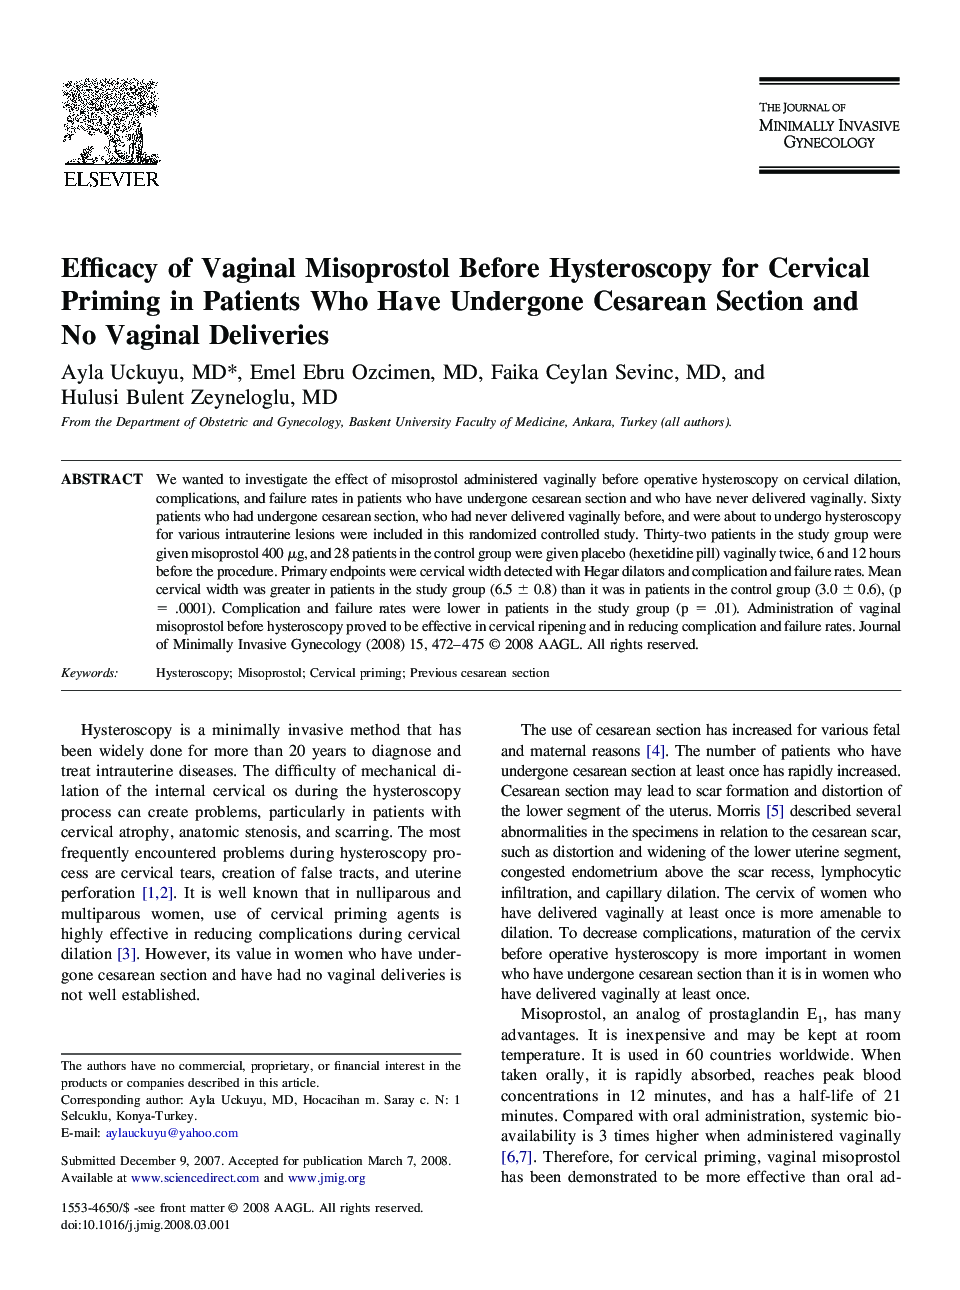 Efficacy of Vaginal Misoprostol Before Hysteroscopy for Cervical Priming in Patients Who Have Undergone Cesarean Section and No Vaginal Deliveries 